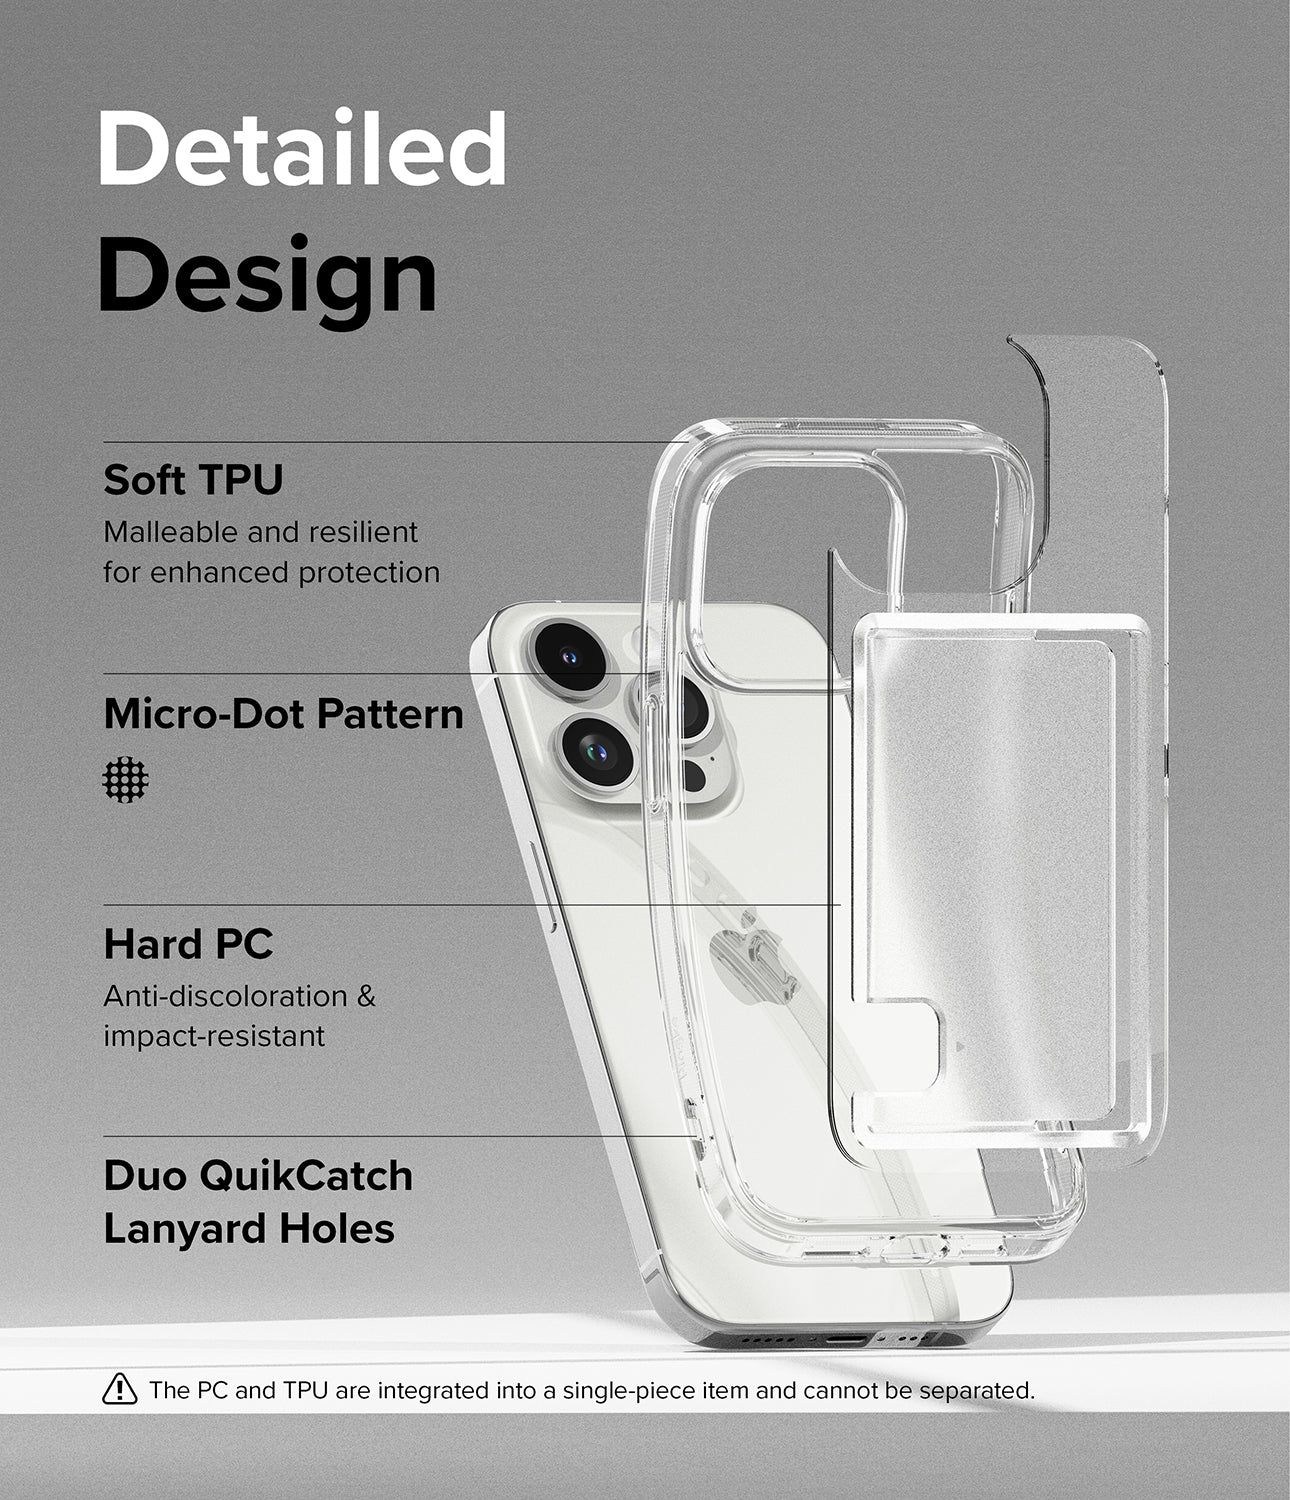 iPhone 15 Pro Case | Fusion Card - Detailed Design. Malleable and resilient for enhanced protection with Soft TPU. Micro-Dot Pattern. Anti-discoloration and impact-resistant with Hard PC. Duo QuikCatch Lanyard Holes.